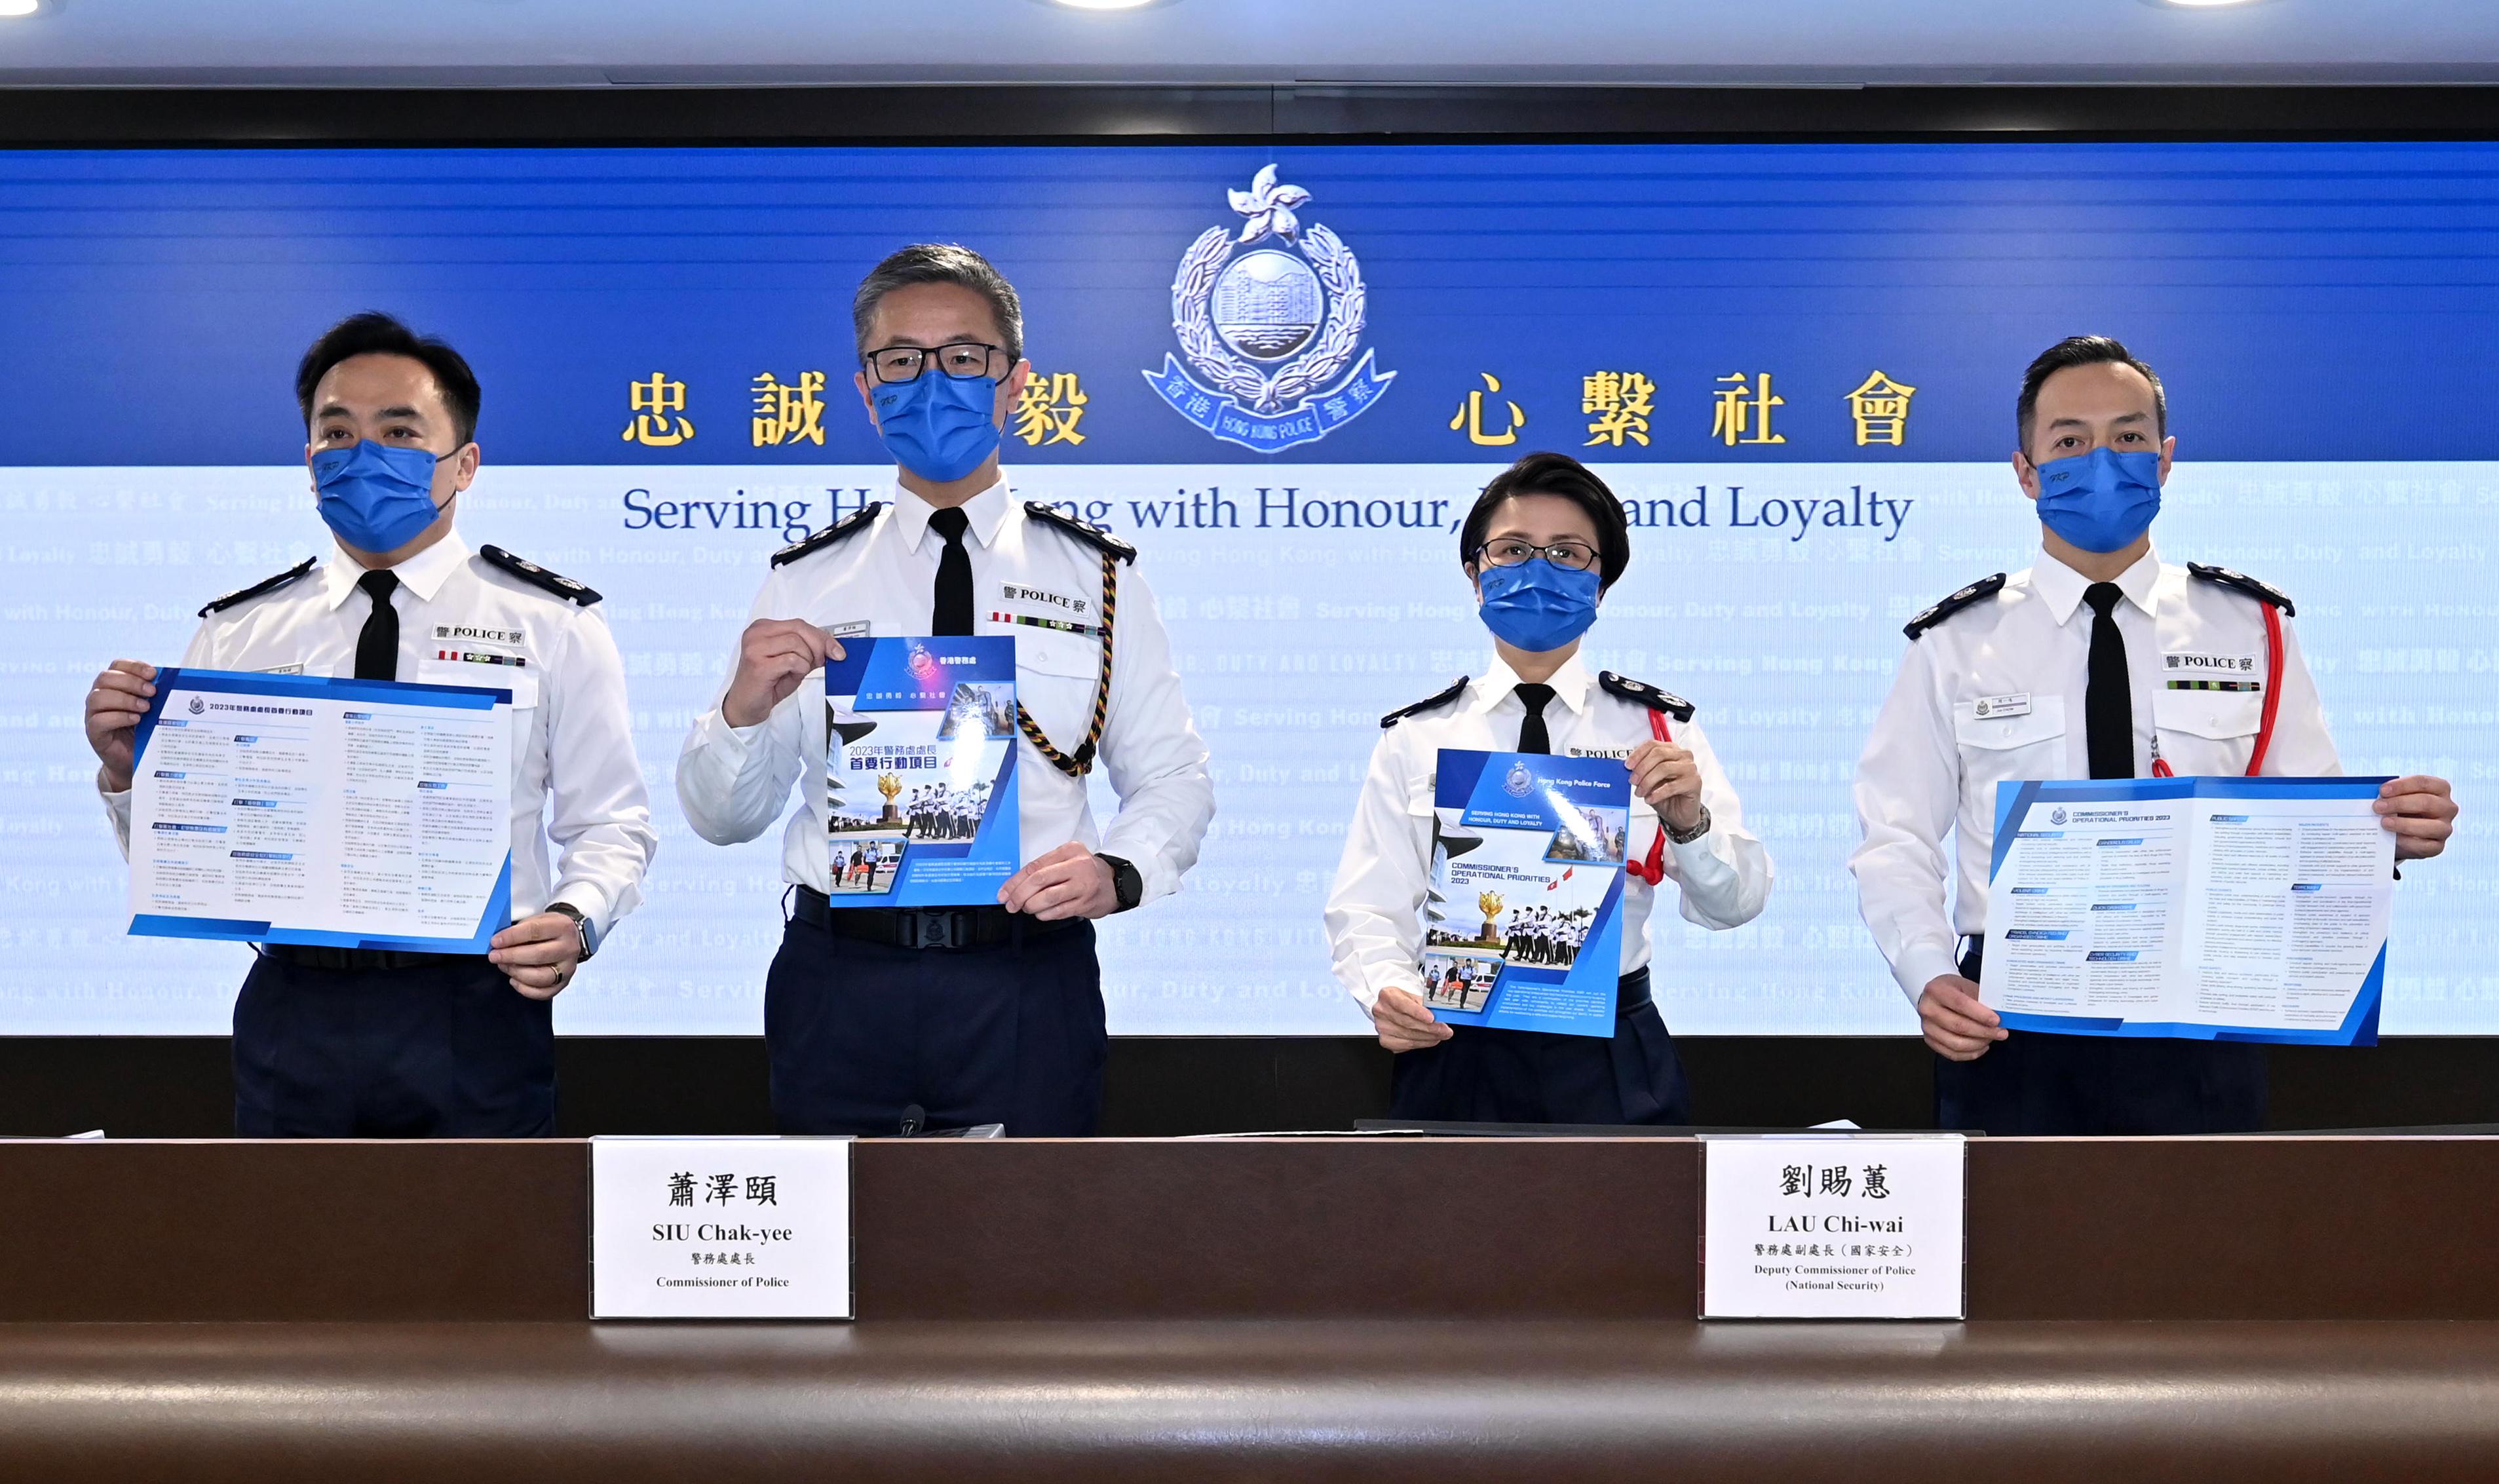 The Commissioner of Police, Mr Siu Chak-yee (second left), reviewed the law and order situation of Hong Kong and the work of the Police in 2022 at a press conference today (February 14). Also present at the press conference were the Deputy Commissioner of Police (National Security), Ms Lau Chi-wai (second right); the Deputy Commissioner of Police (Operations), Mr Yuen Yuk-kin (first left); and the Deputy Commissioner of Police (Management), Mr Chow Yat-ming (first right).